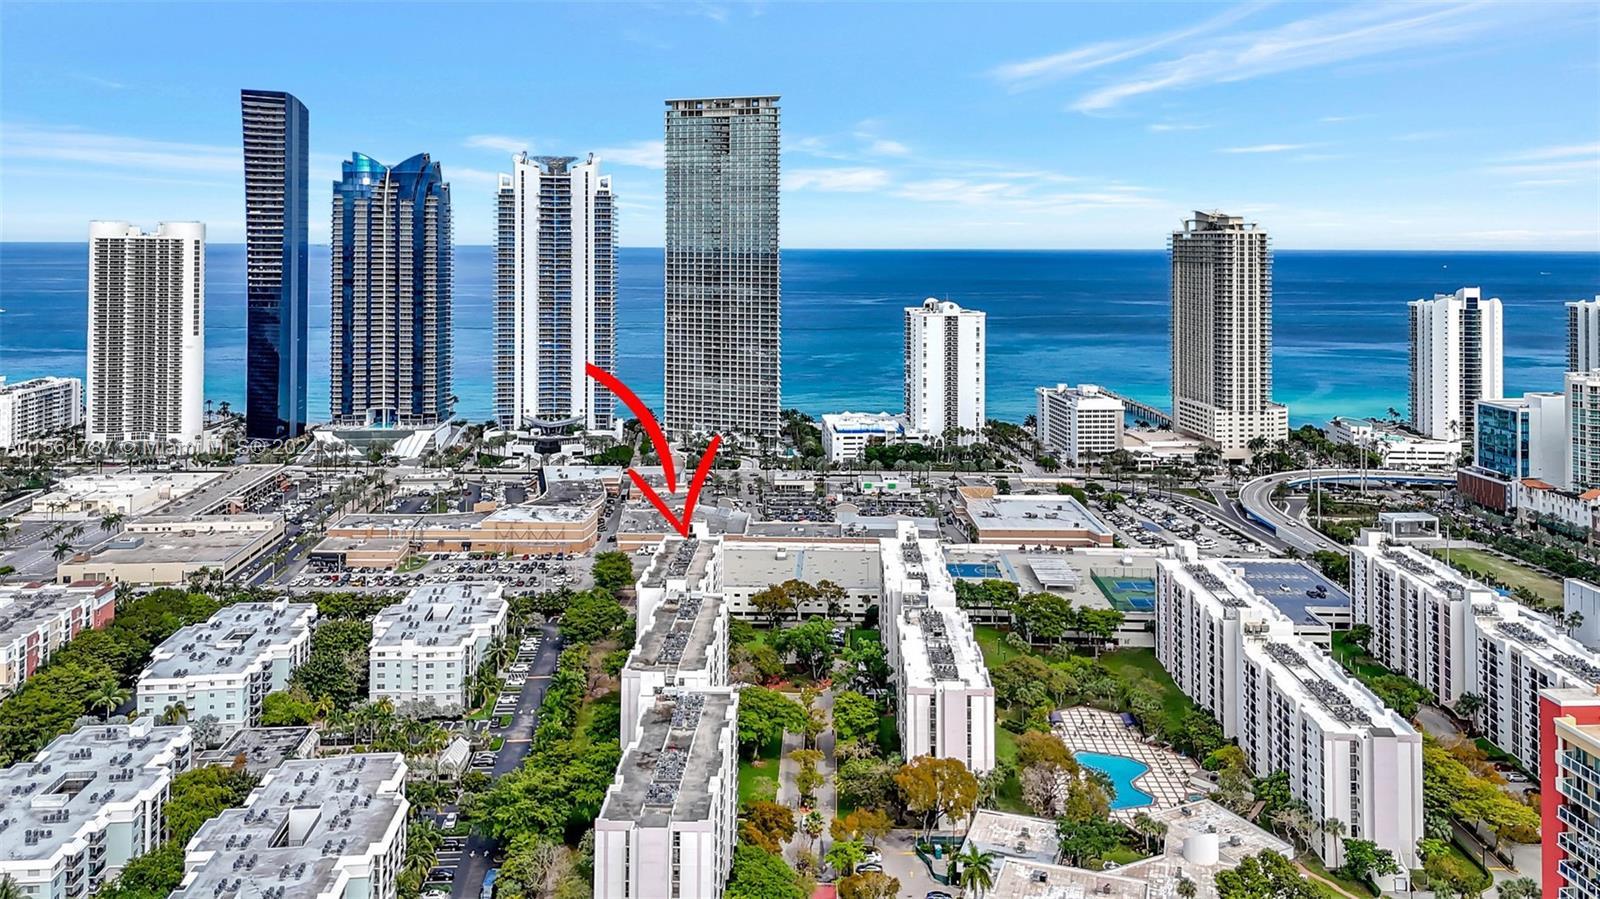 Unit in amazing location. 3-minute walk to beach. Close to everything Sunny Isles has to offer. Noth